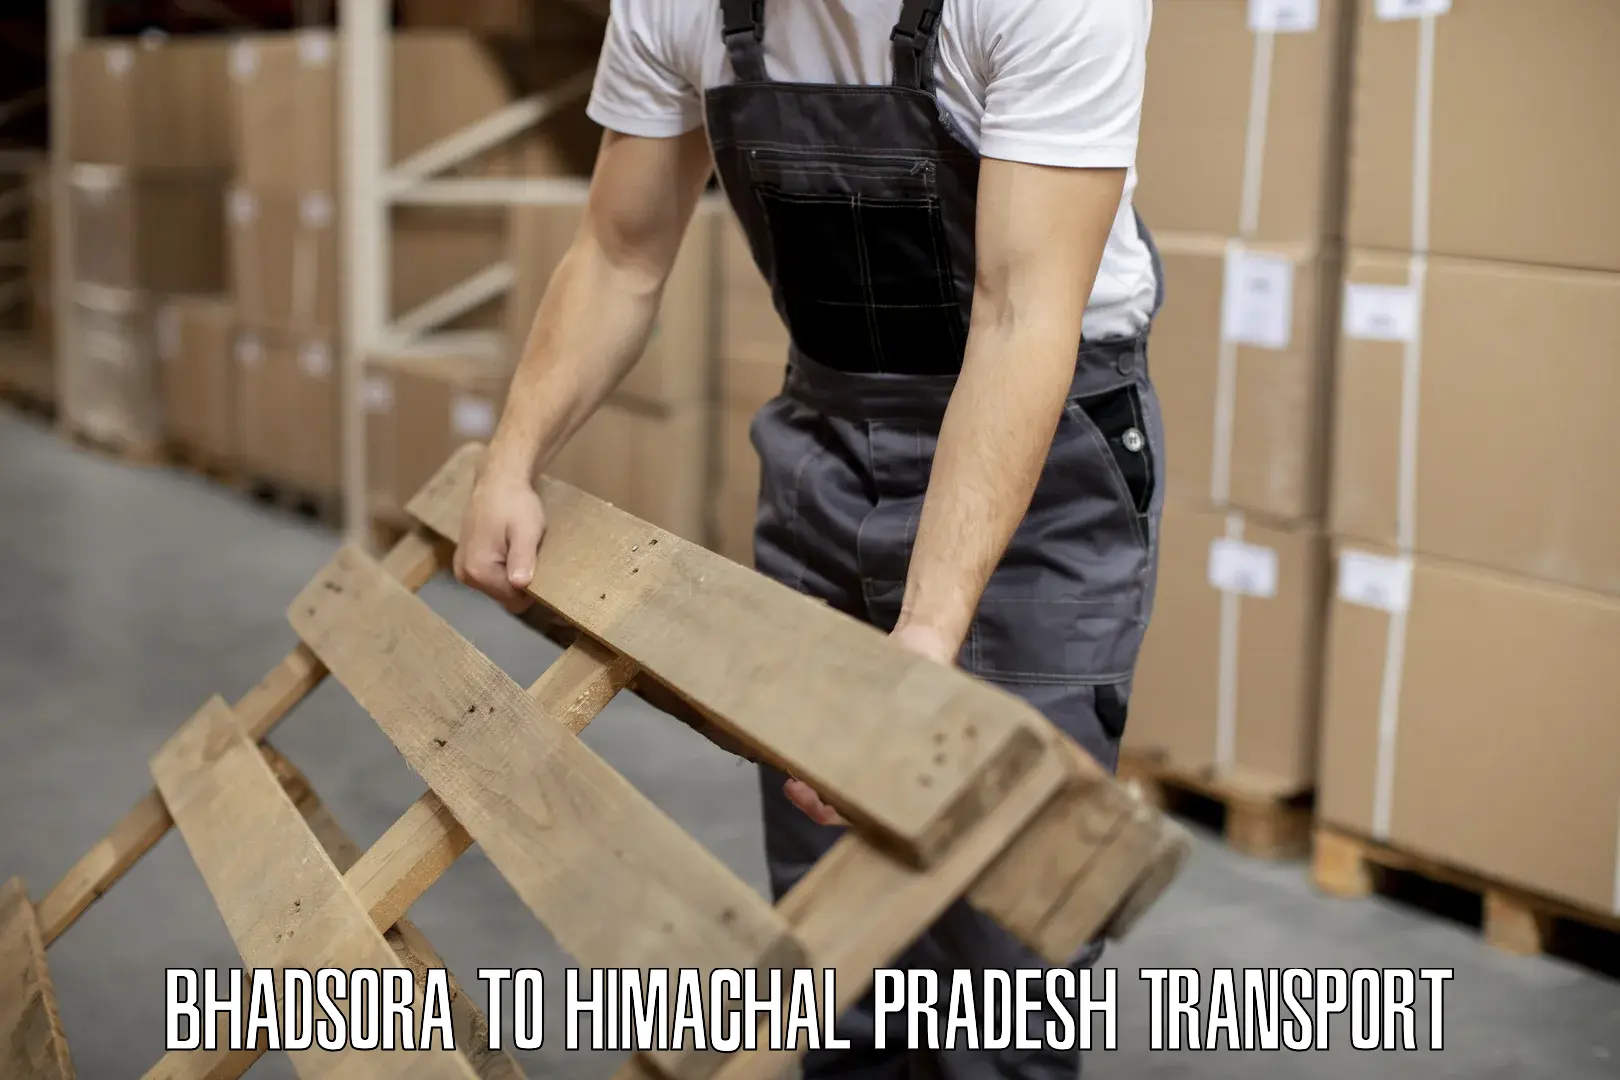 Bike shipping service Bhadsora to Reckong Peo